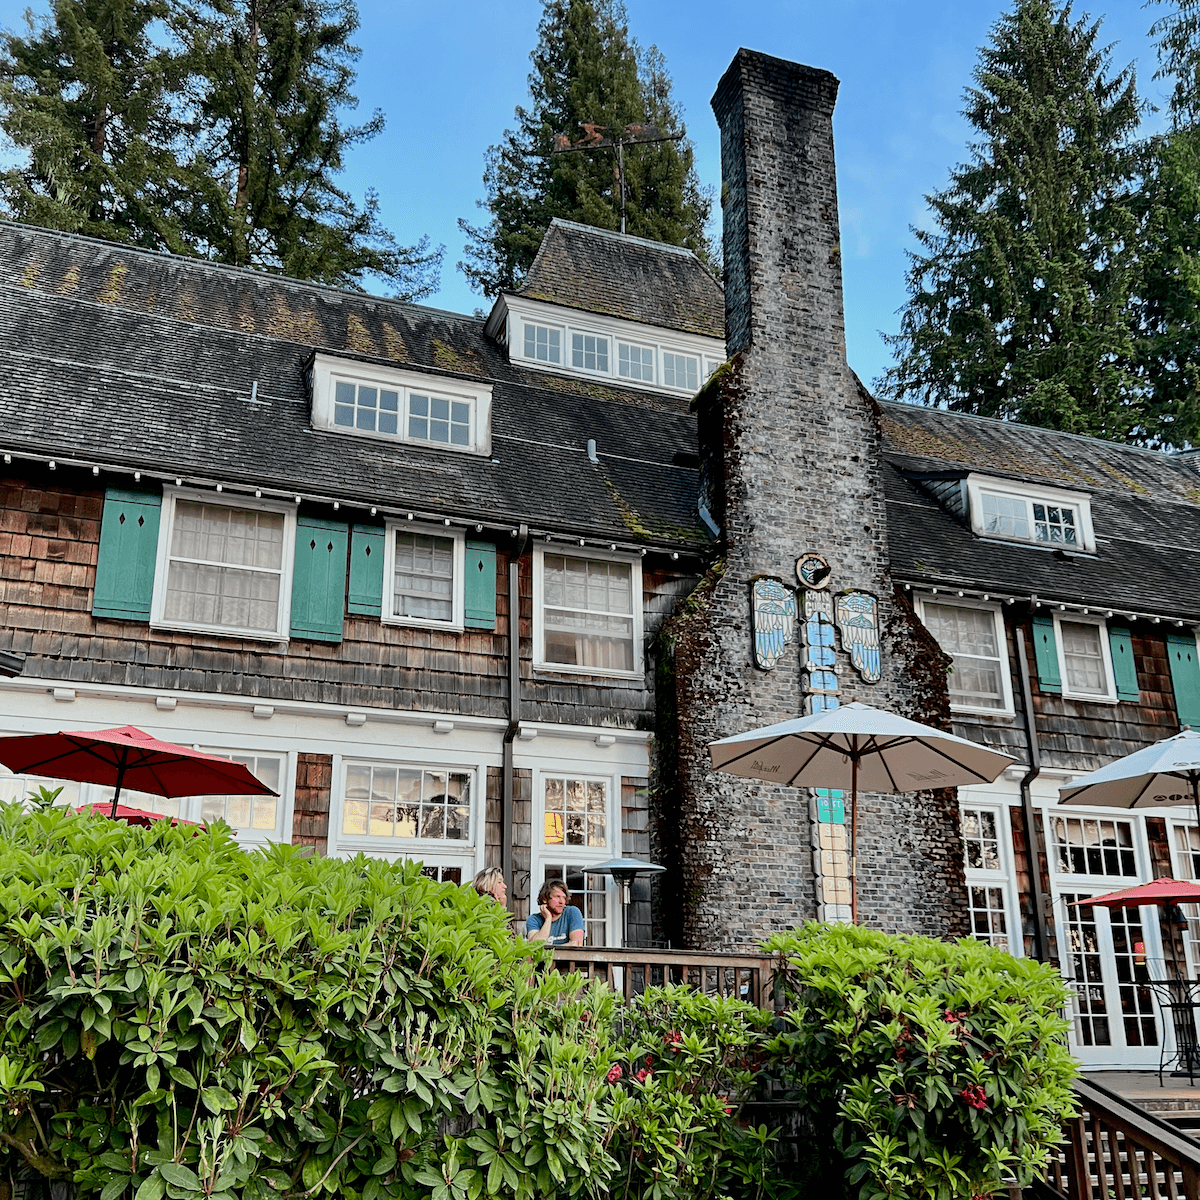 Lake Quinault lodge is a wonderful place to find connection to nature. The lodge is old wood style with a large brick fireplace rising up to the blue sky while fir trees frame int he shot.